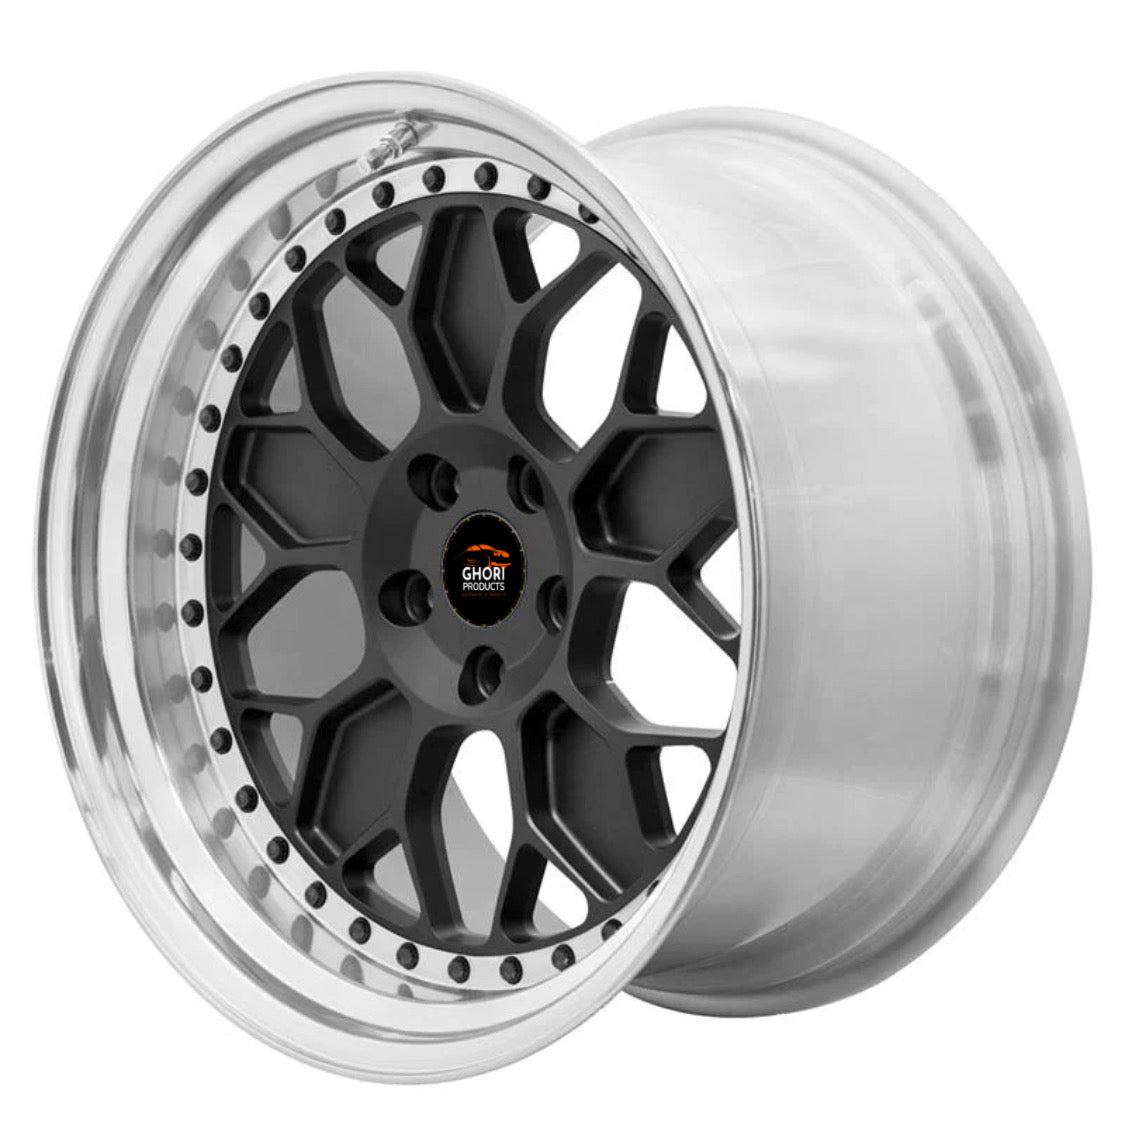 Dynamic ForgeX - Forged Aluminum T312 Wheels for Tesla Model Y 5X114.3 (Set of 4)